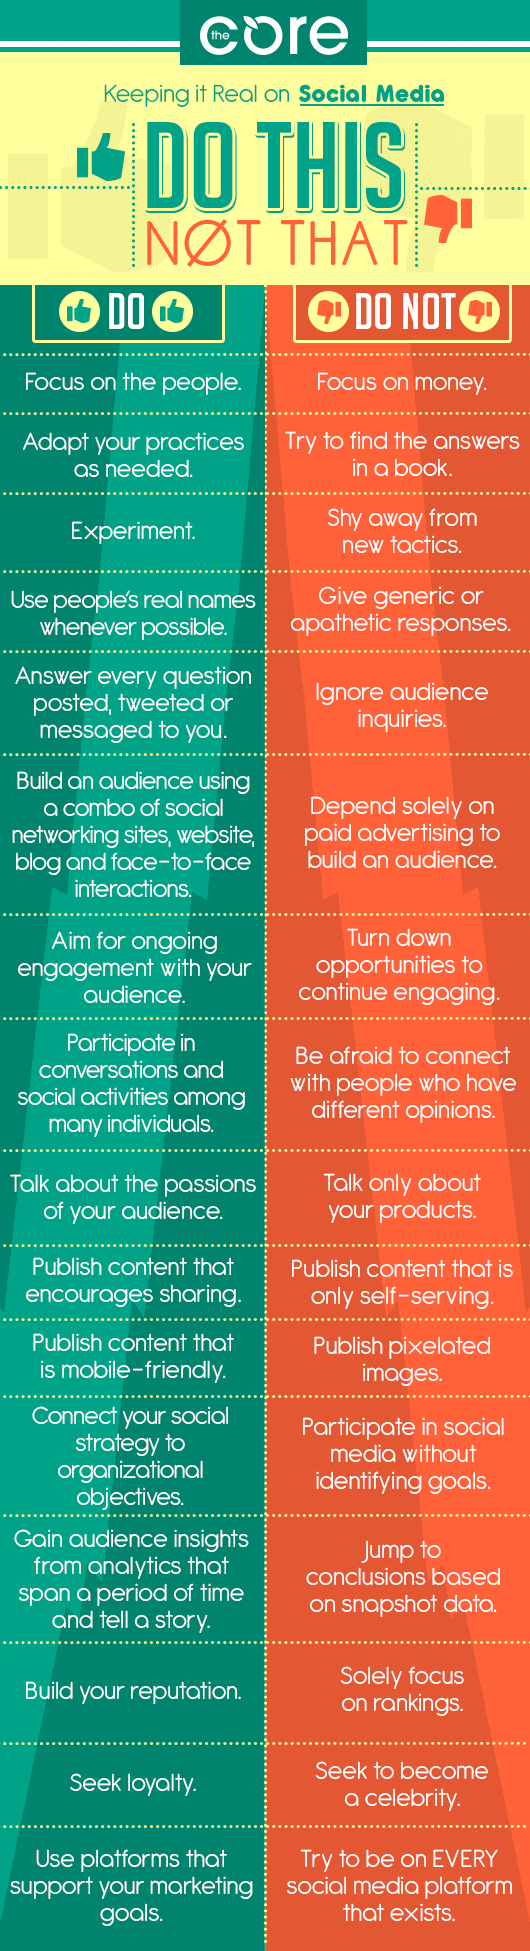 Social Media Best Practices: What to Do and What to Avoid Infographic image